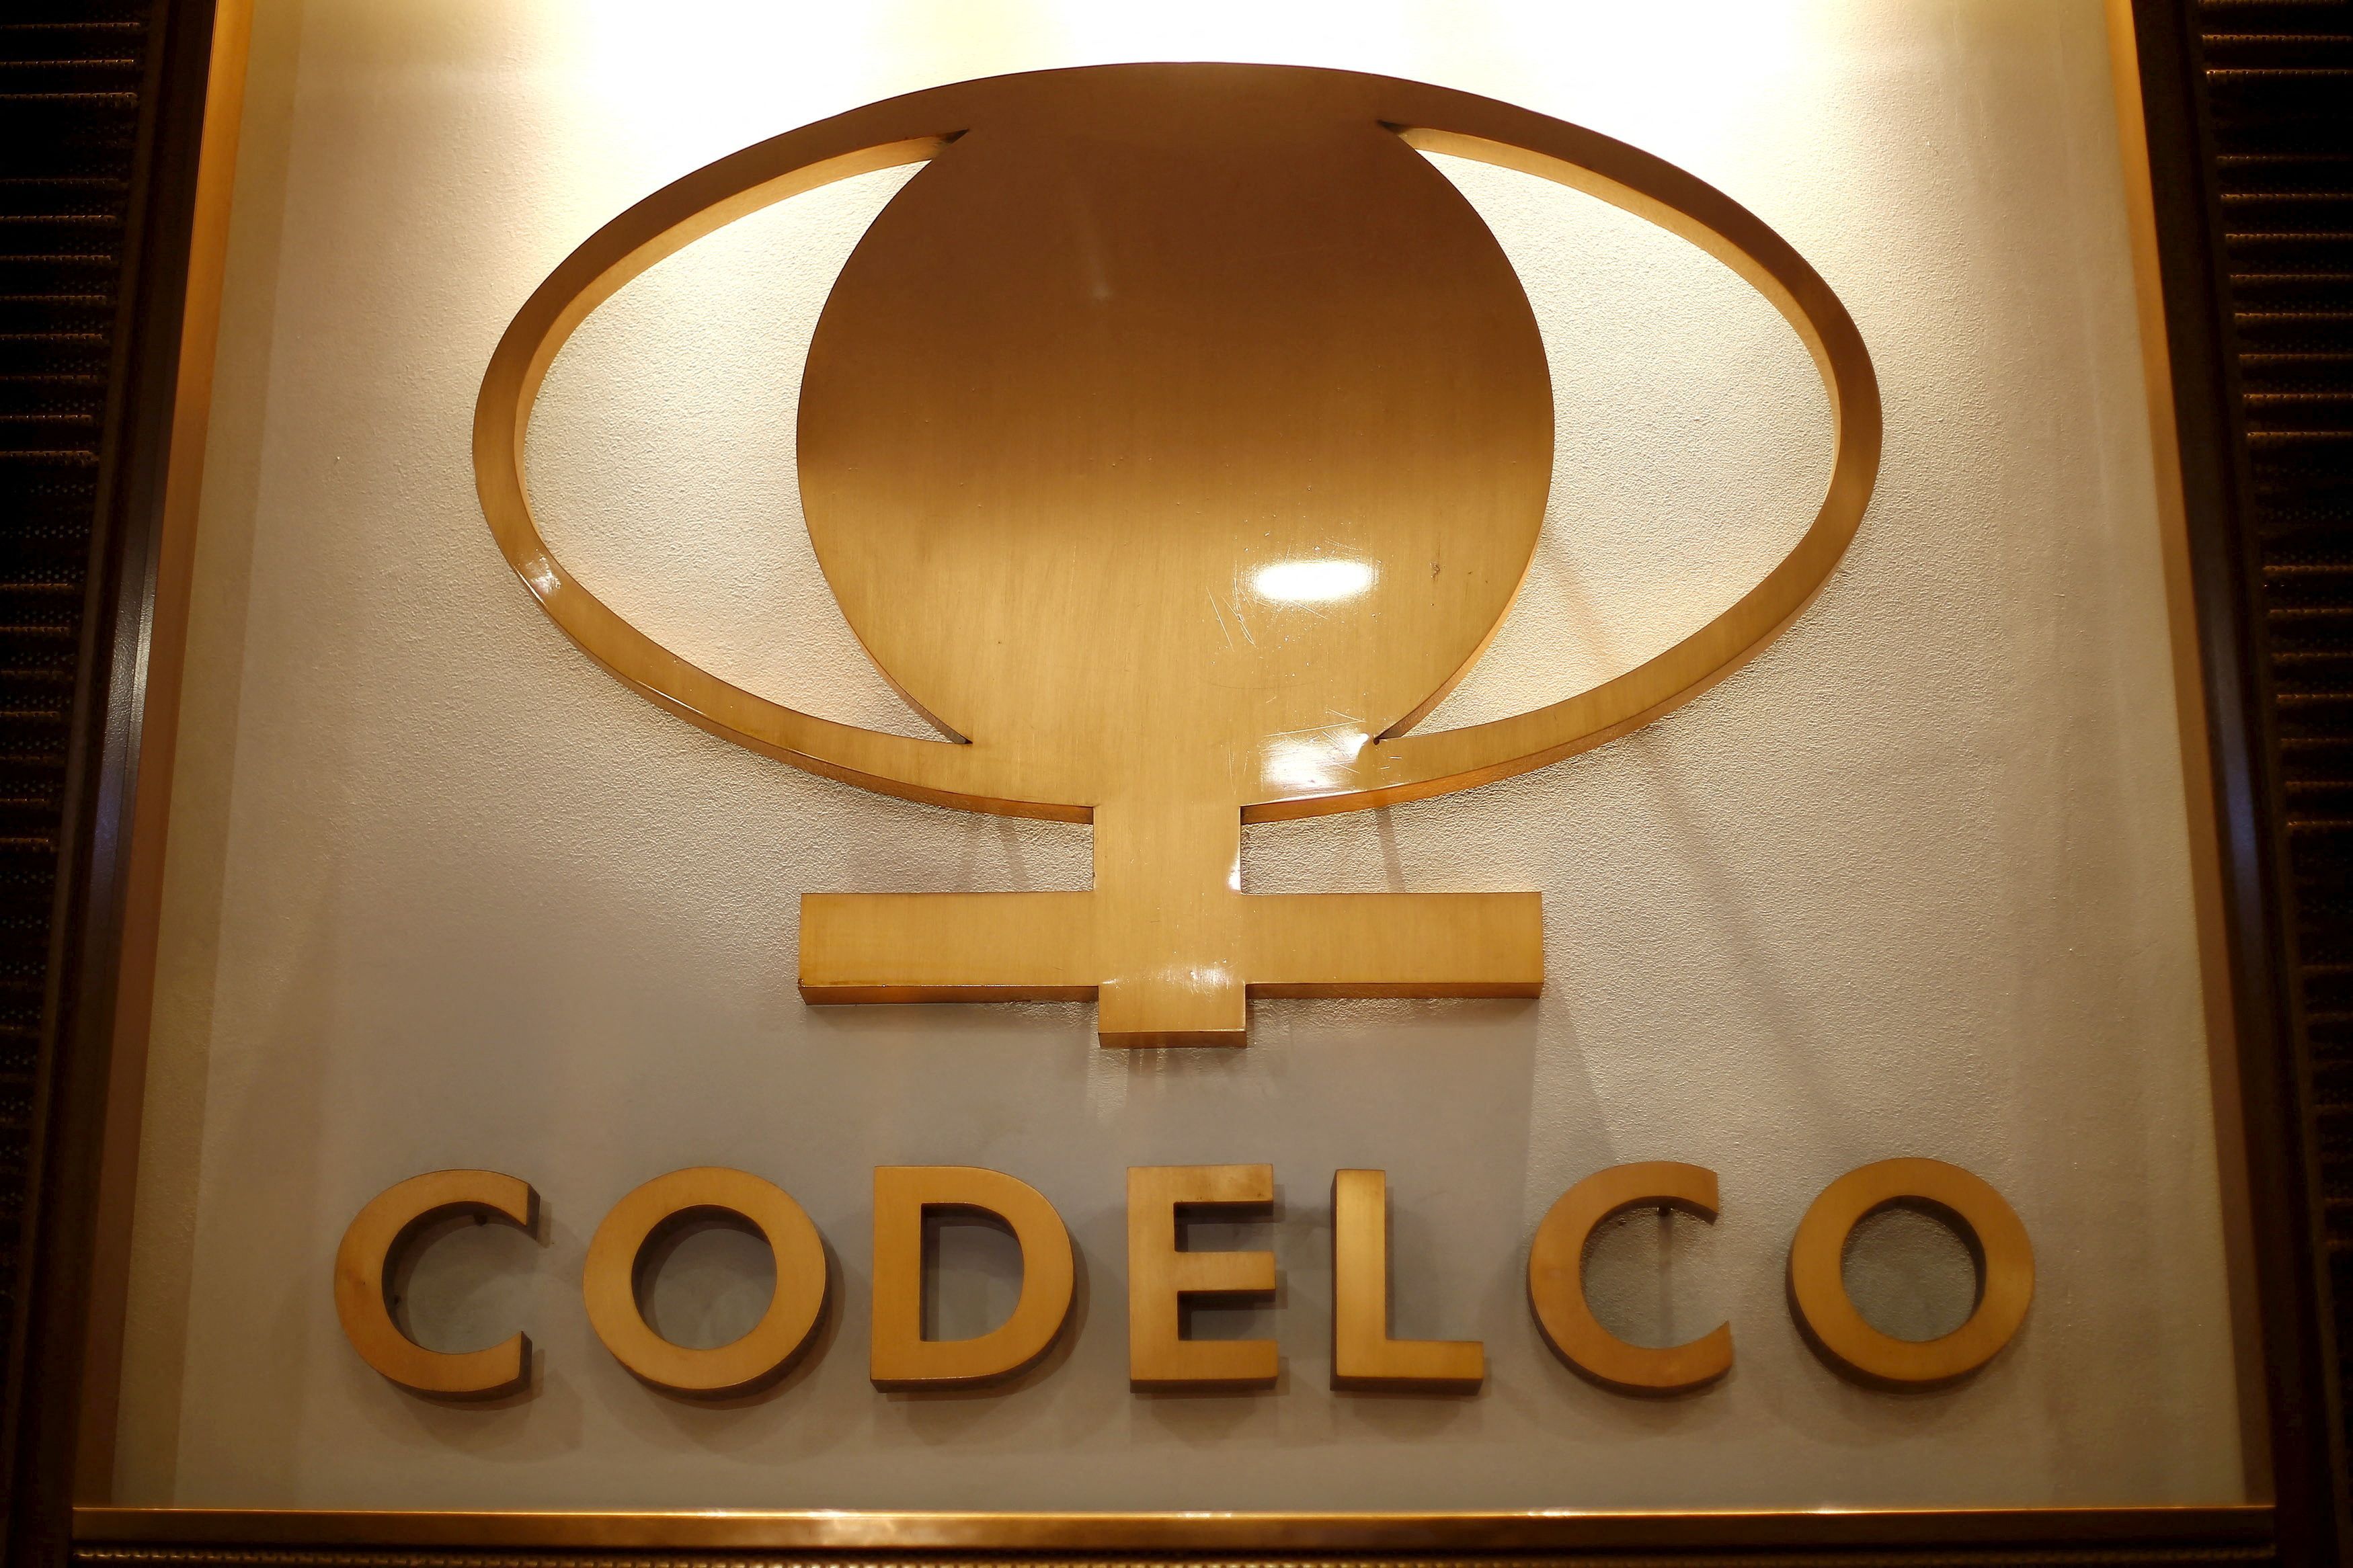 The logo of Codelco, the world's largest copper producer, is seen at their headquarter in downtown Santiago